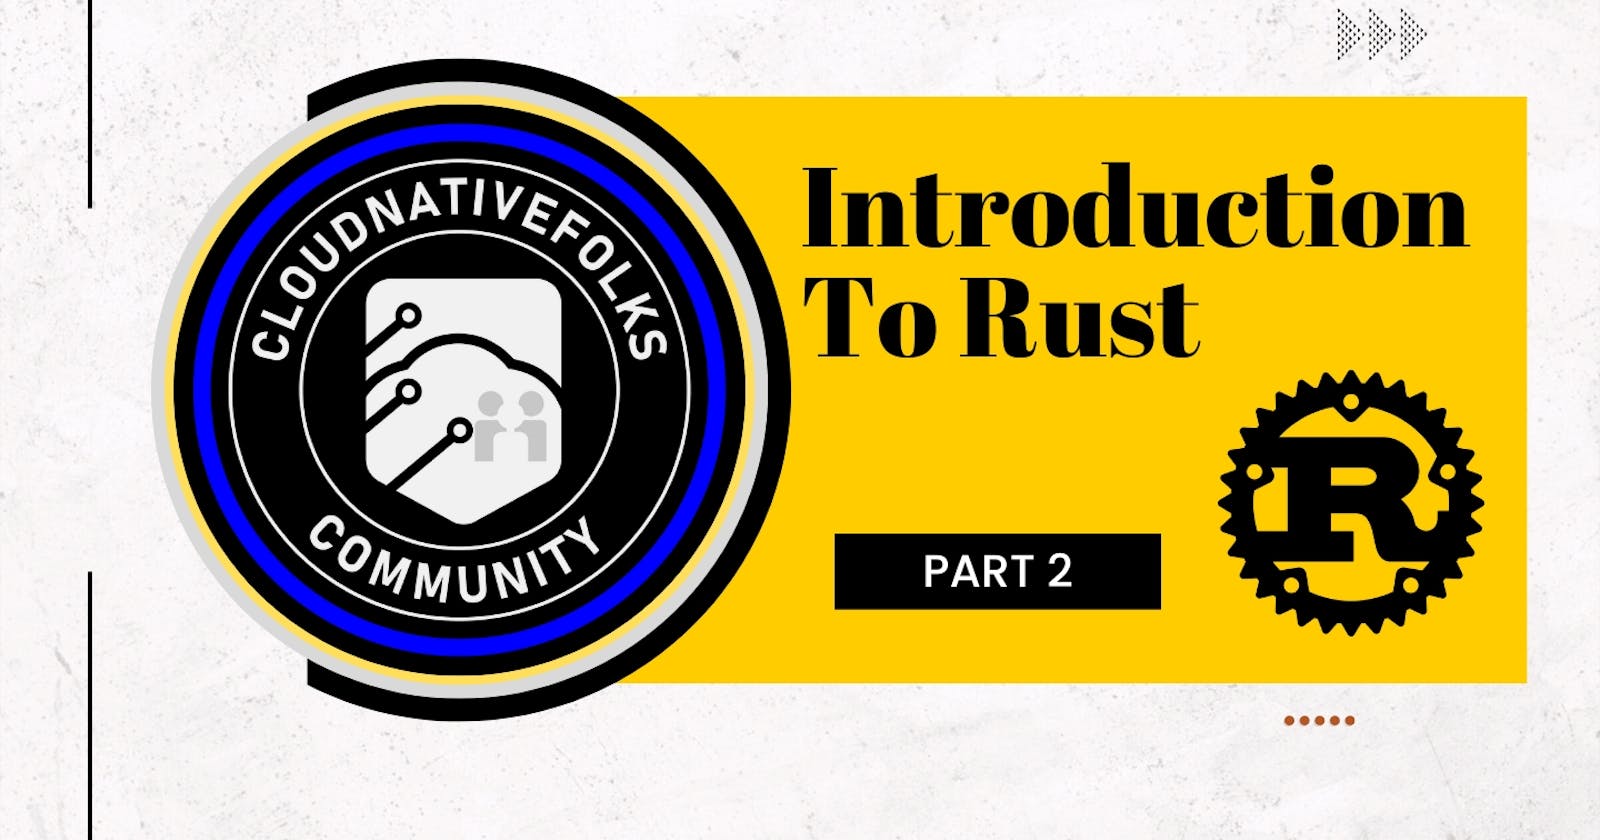 Introduction to Rust  - Part 2